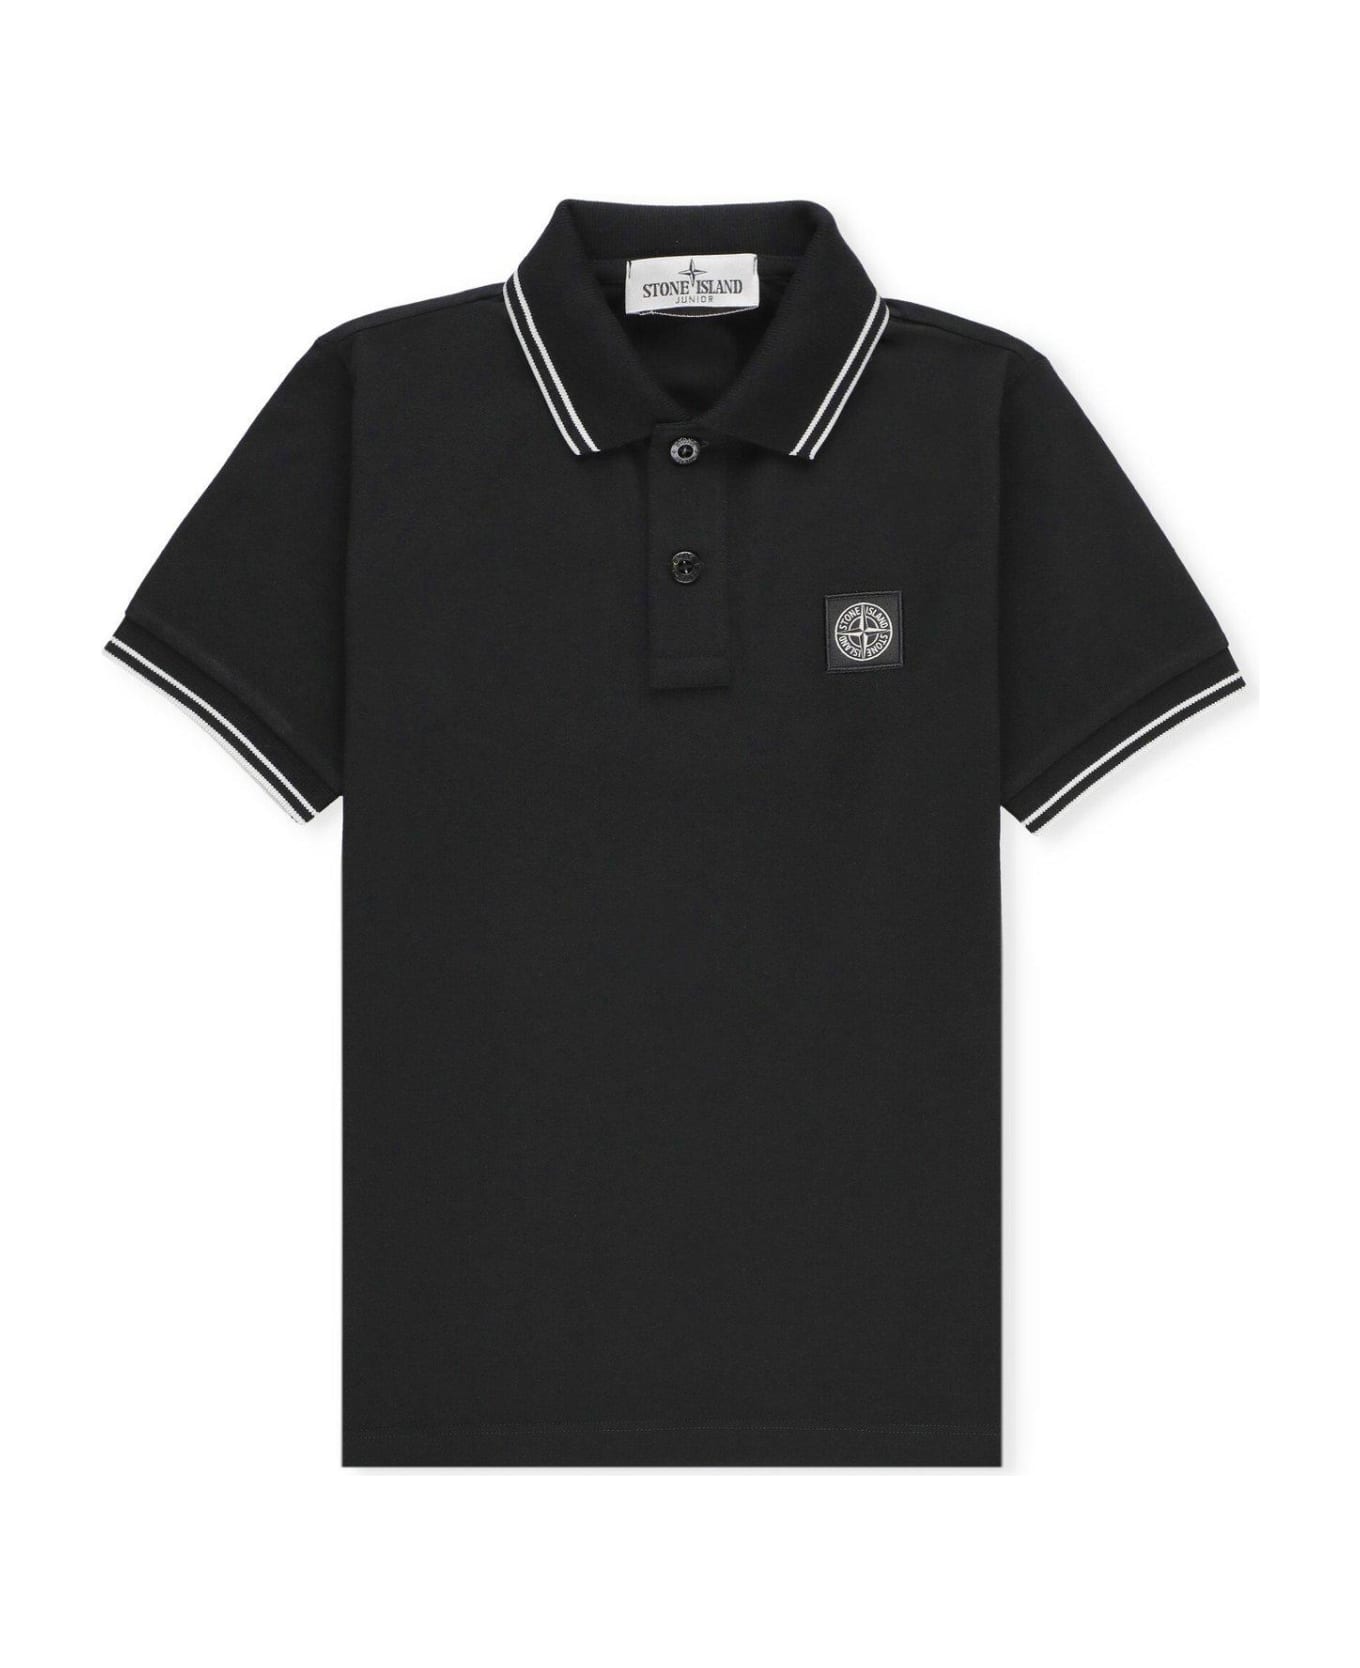 Stone Island Compass Patch Short-sleeved Polo Shirt - BLACK